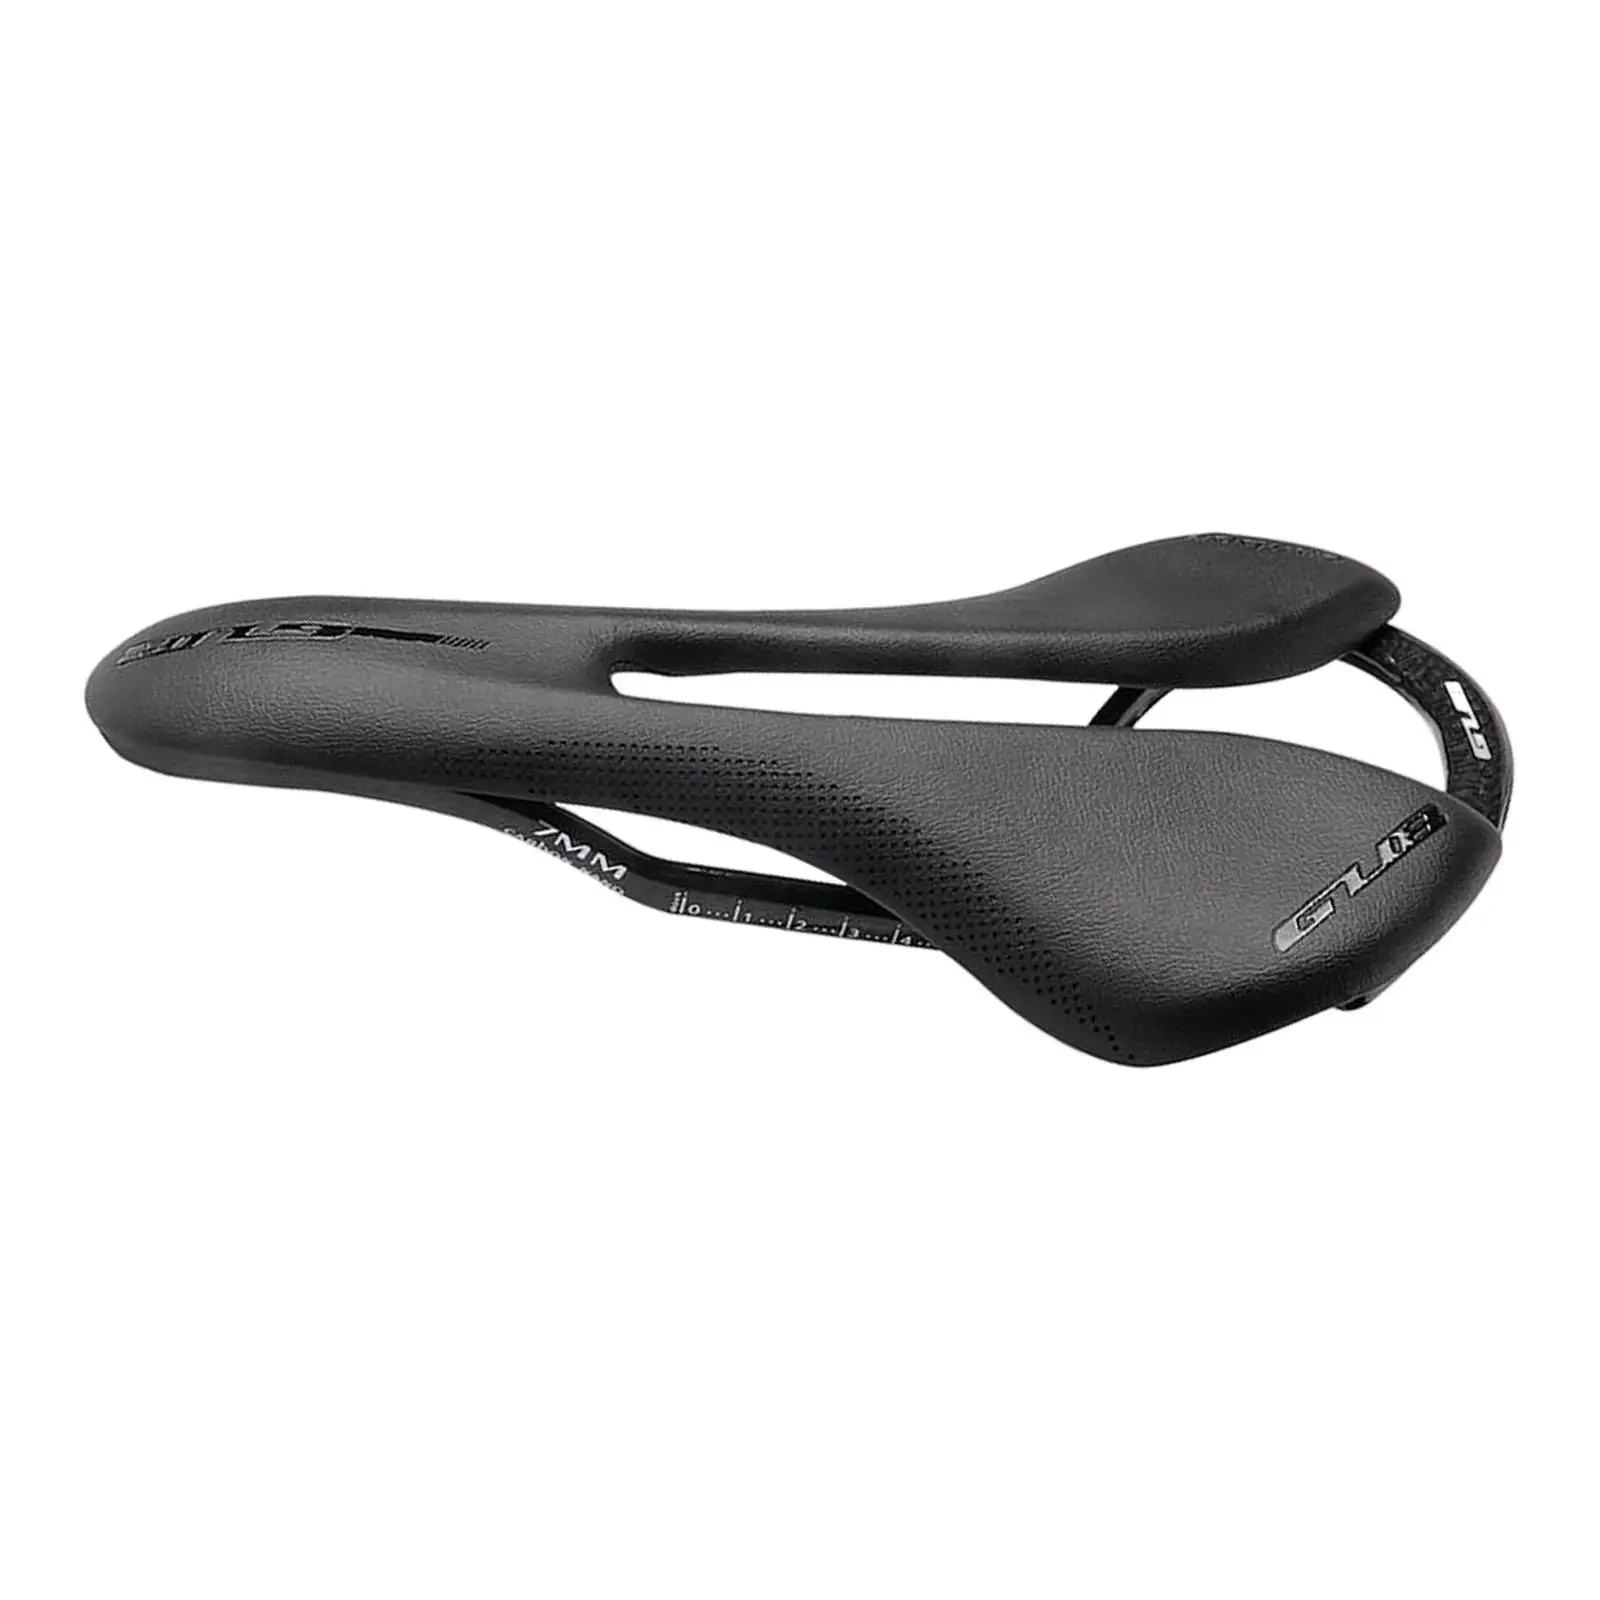 Universal Bike Saddle Carbon Fiber cushion PU Leather Black Breathable for Replacement Racing Outdoor Mountain Bike